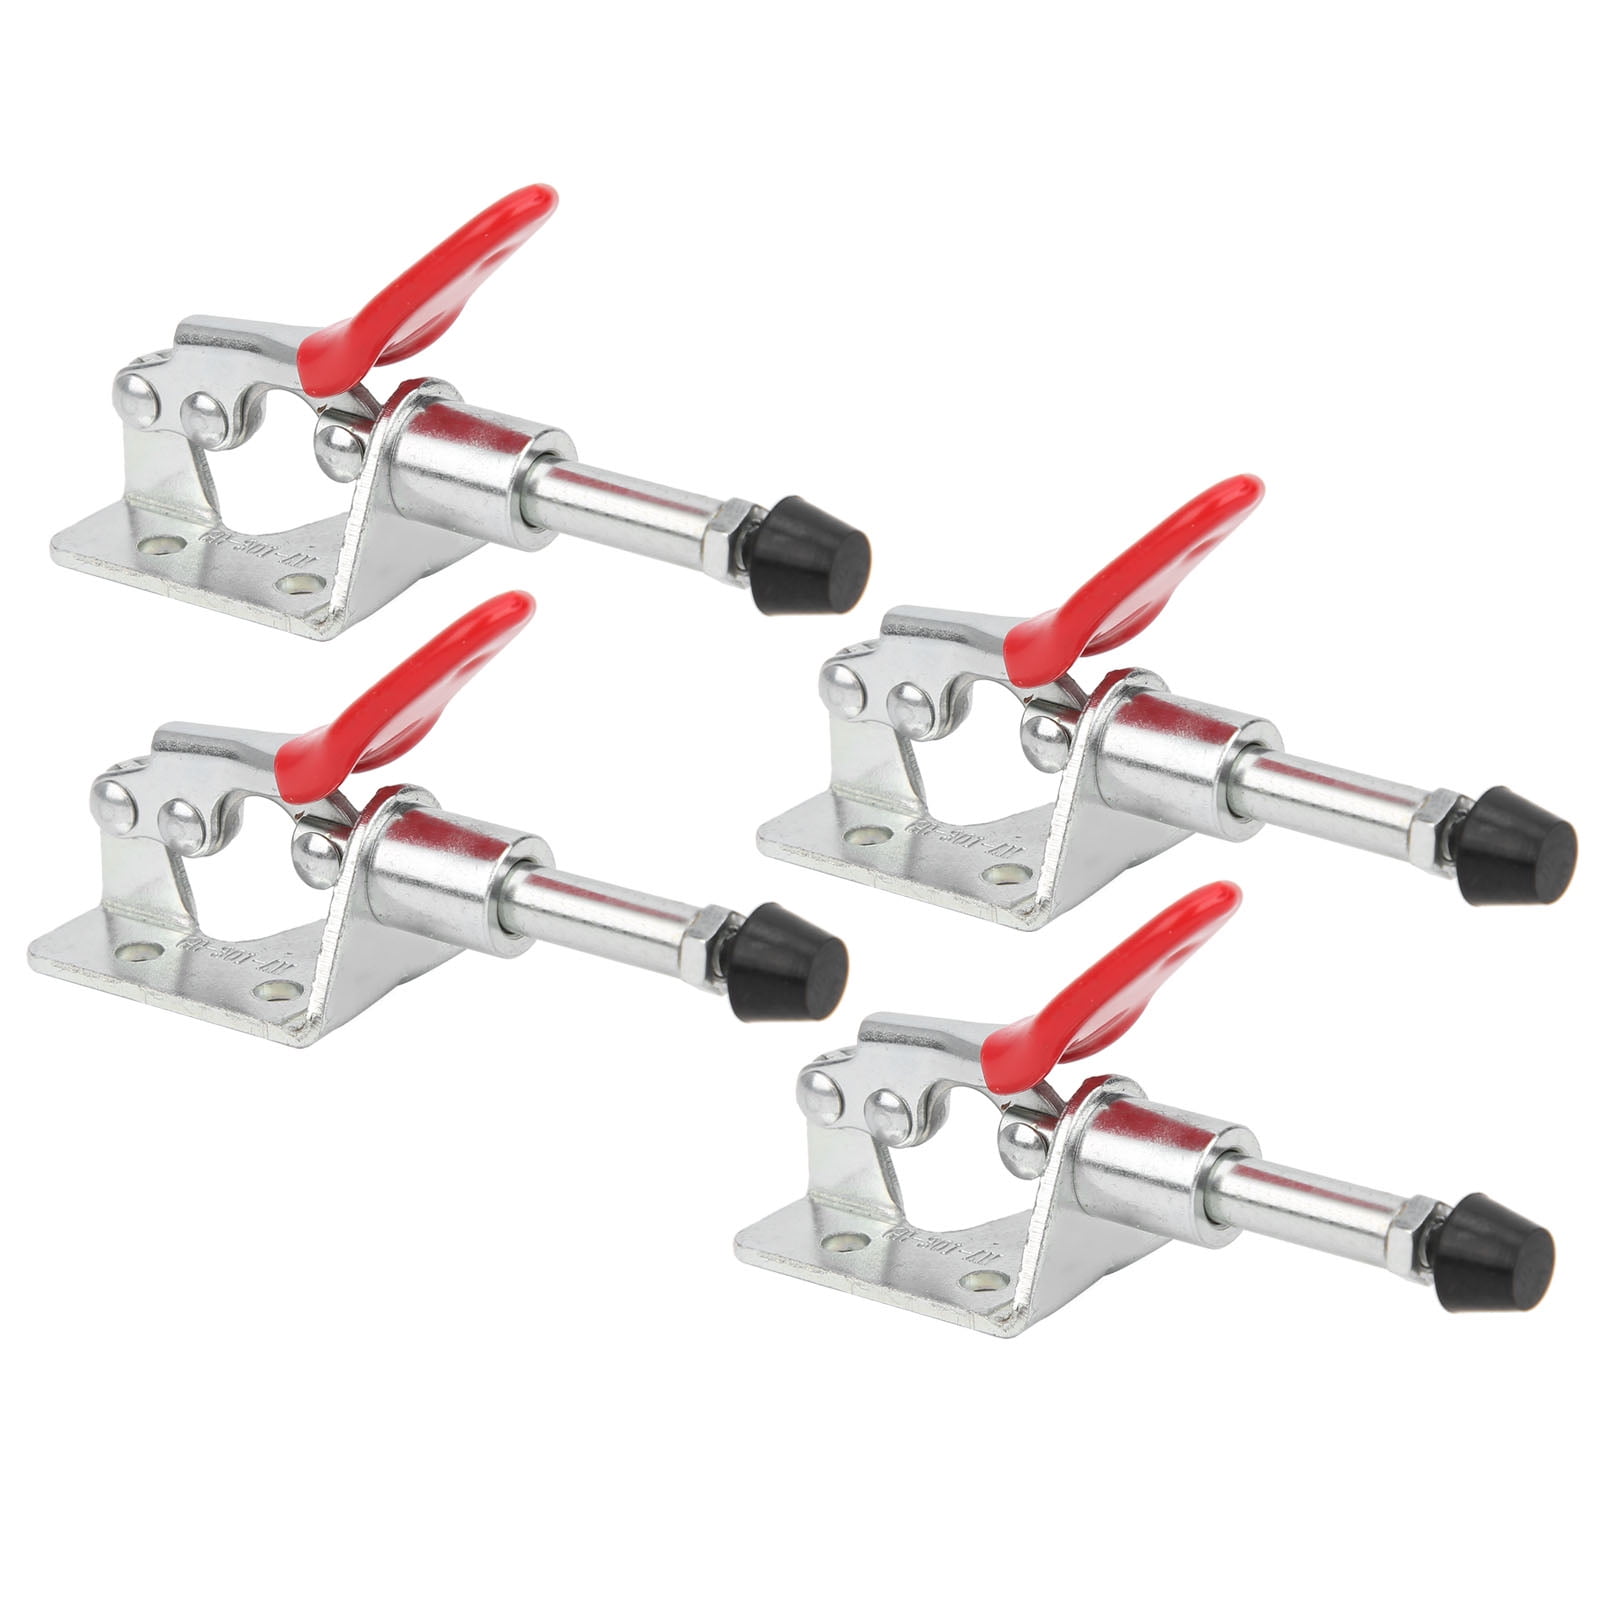 4Pcs -AM Metal Toggle Clamp Fixed Lock Load 45kg Quick Release Hand Tool 